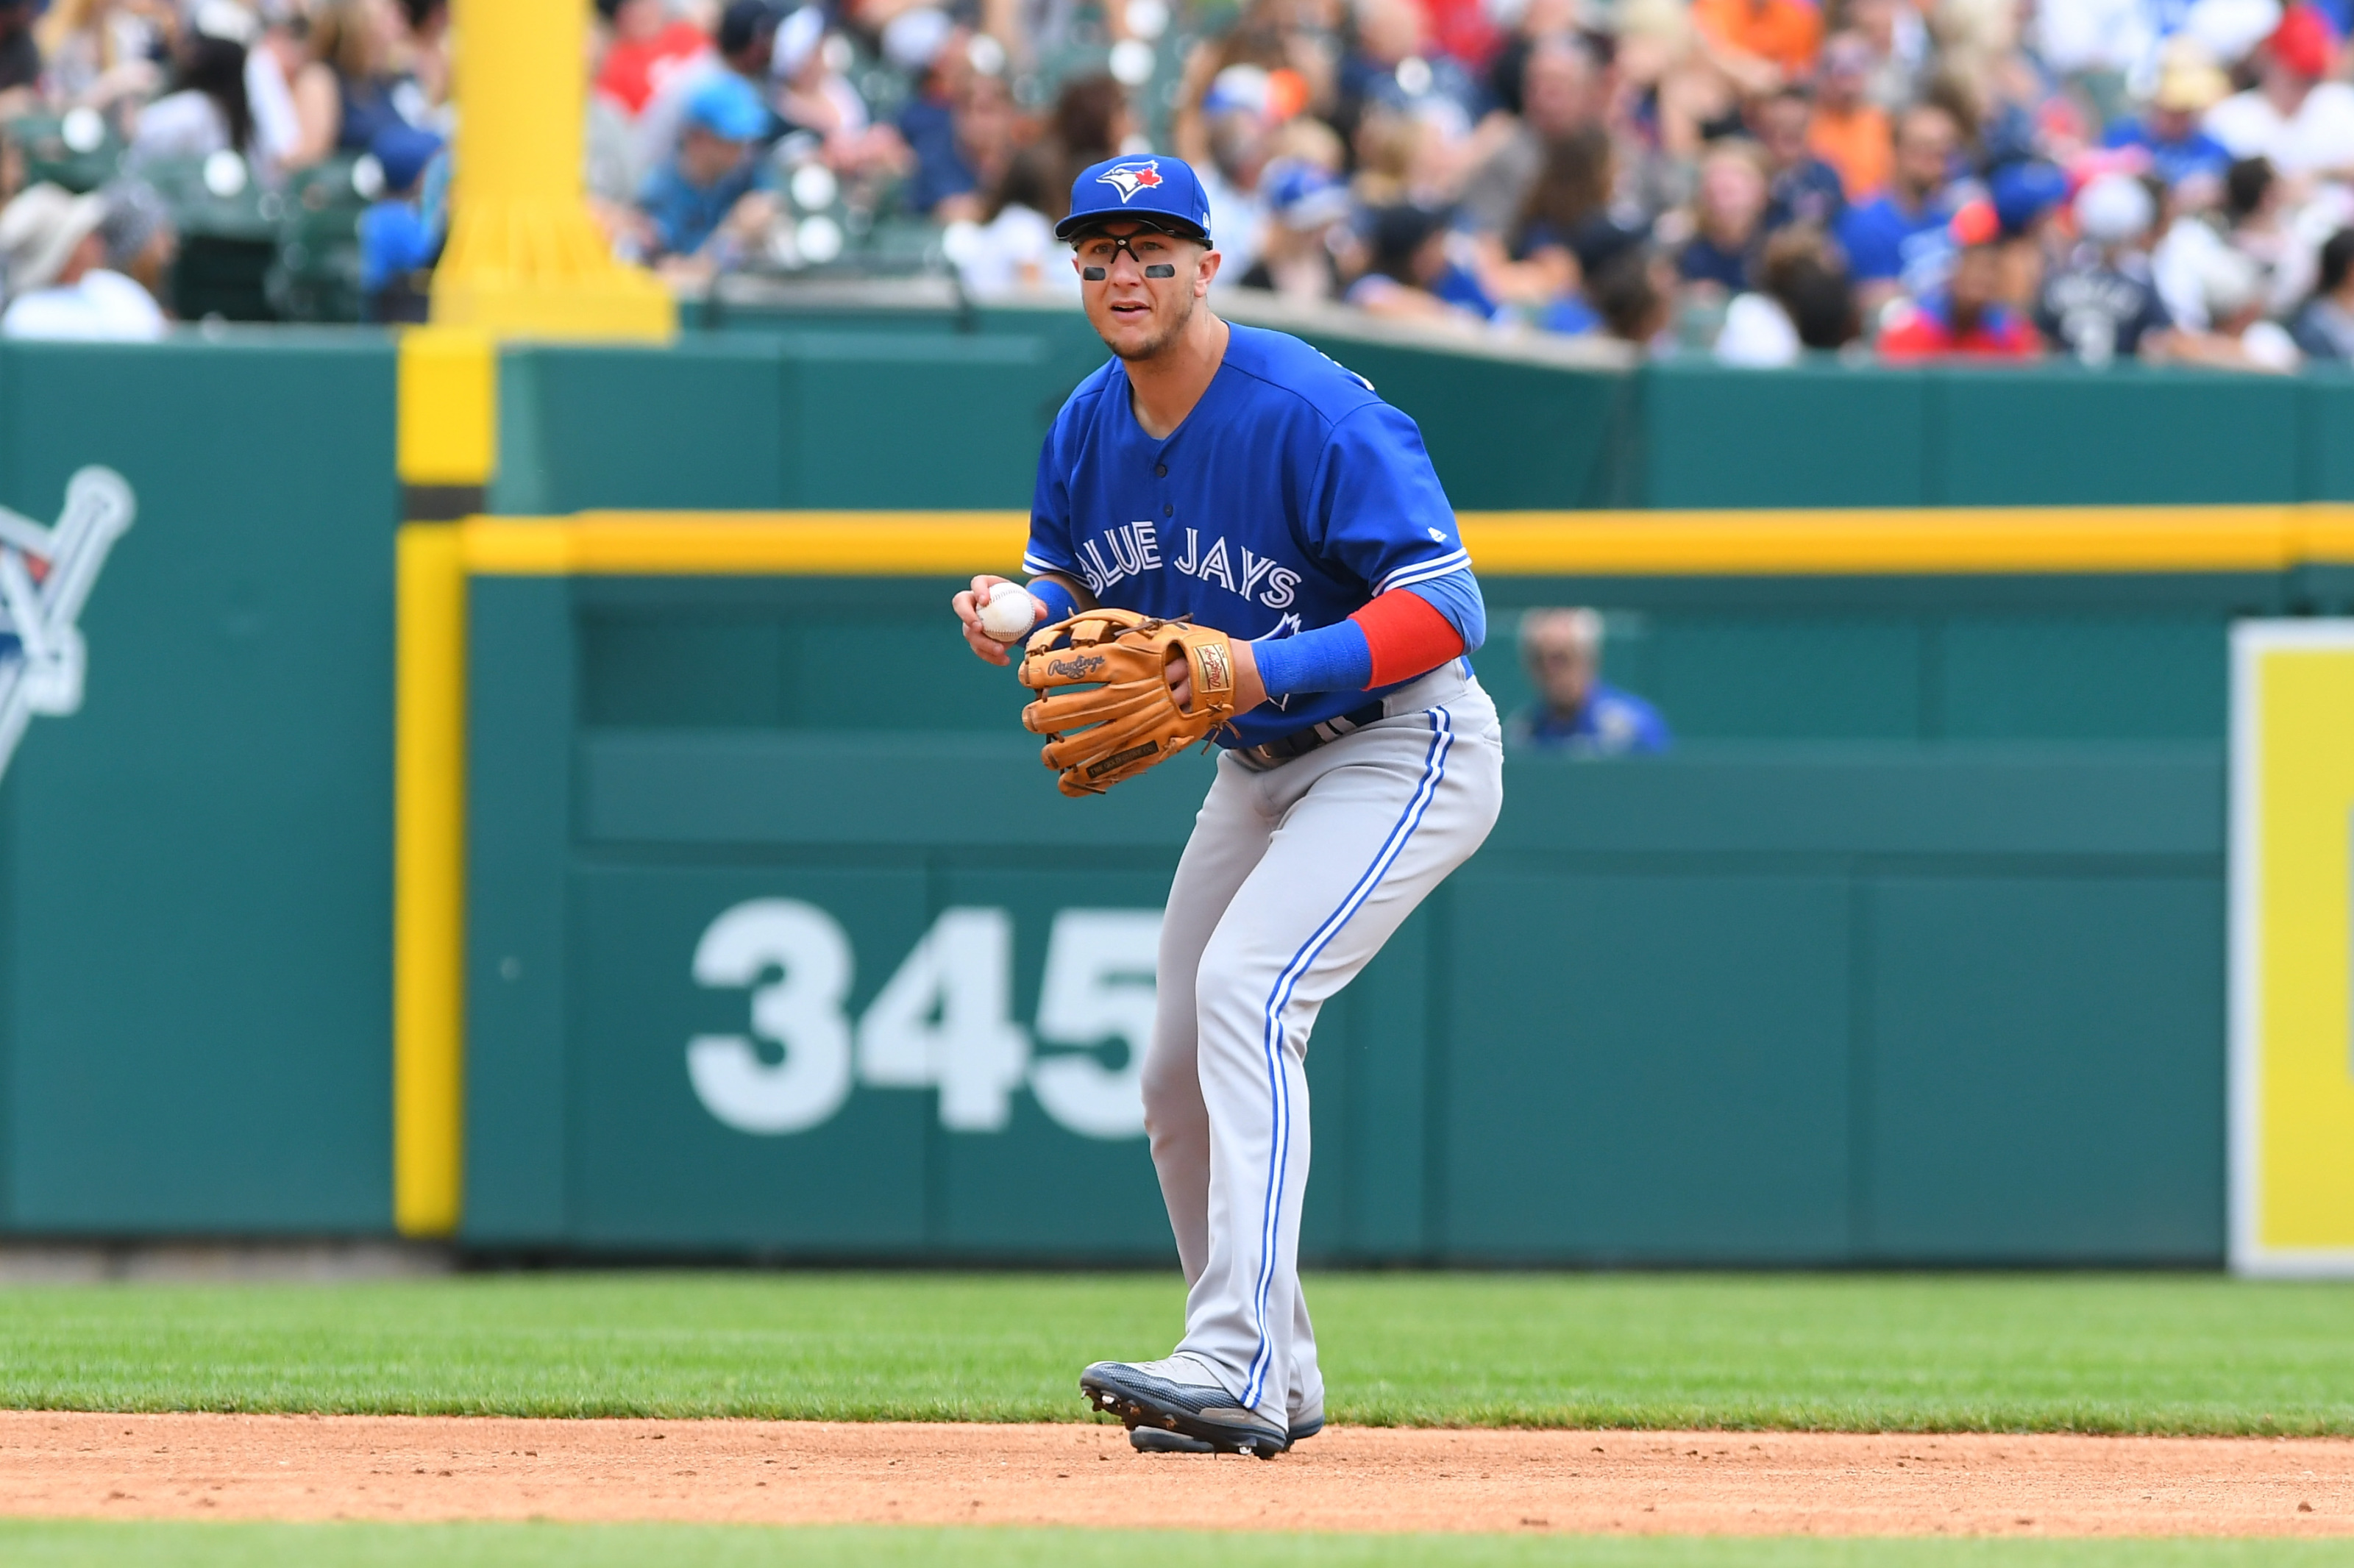 What's going on with Troy Tulowitzki?